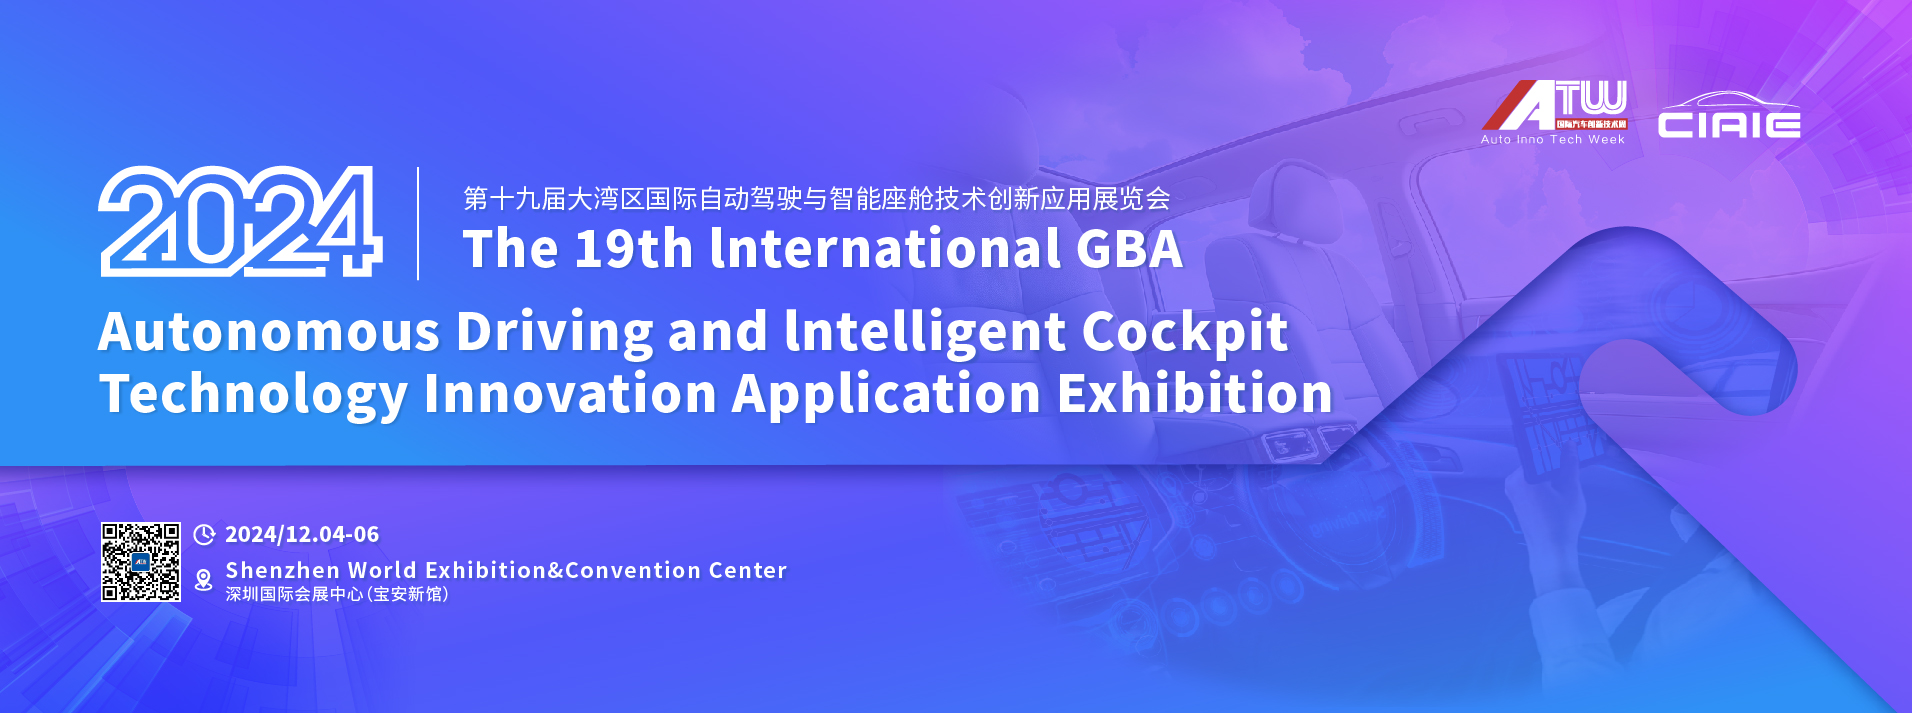 2024 The 19th International GBA Autonomous Driving and Intelligent Cockpit Technology Innovation Application Exhibition